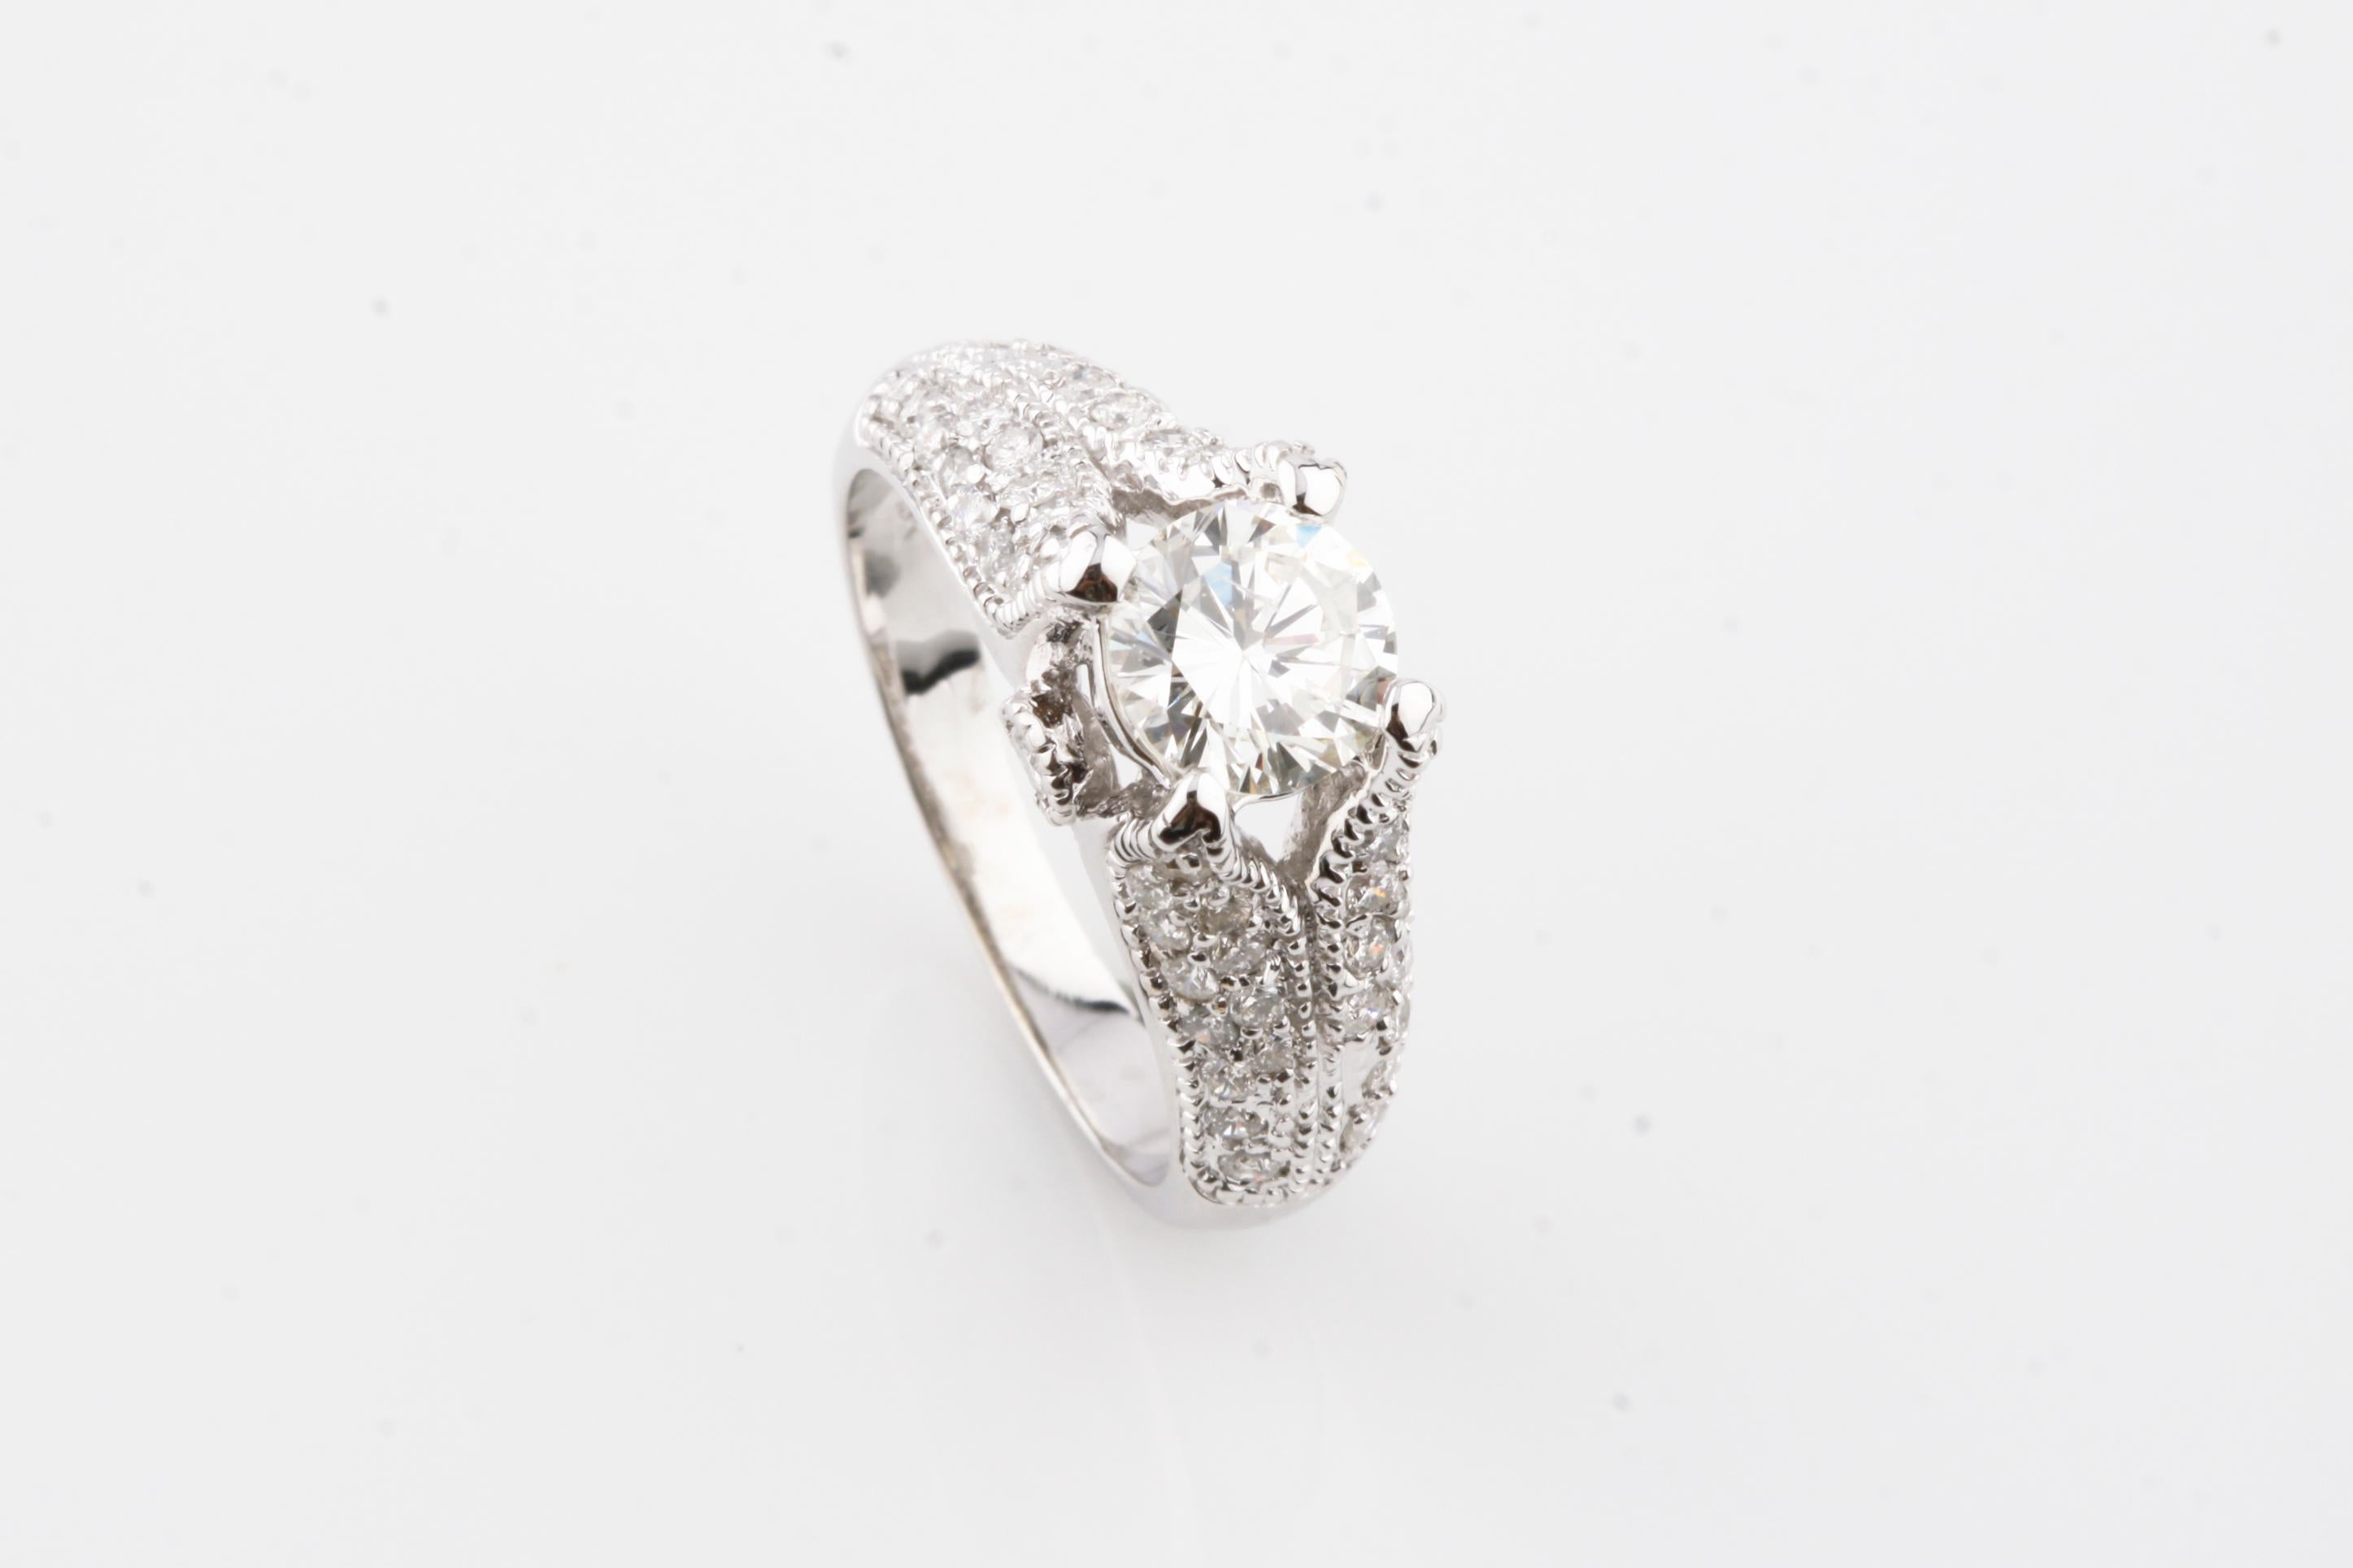 One electronically tested 18KT white gold ladies cast diamond unity ring.
Condition is good.
Featuring a diamond solitaire set within a gallery of diamonds, supported by diamond set shoulders
Completed by a three millimeter wide band.
Identified